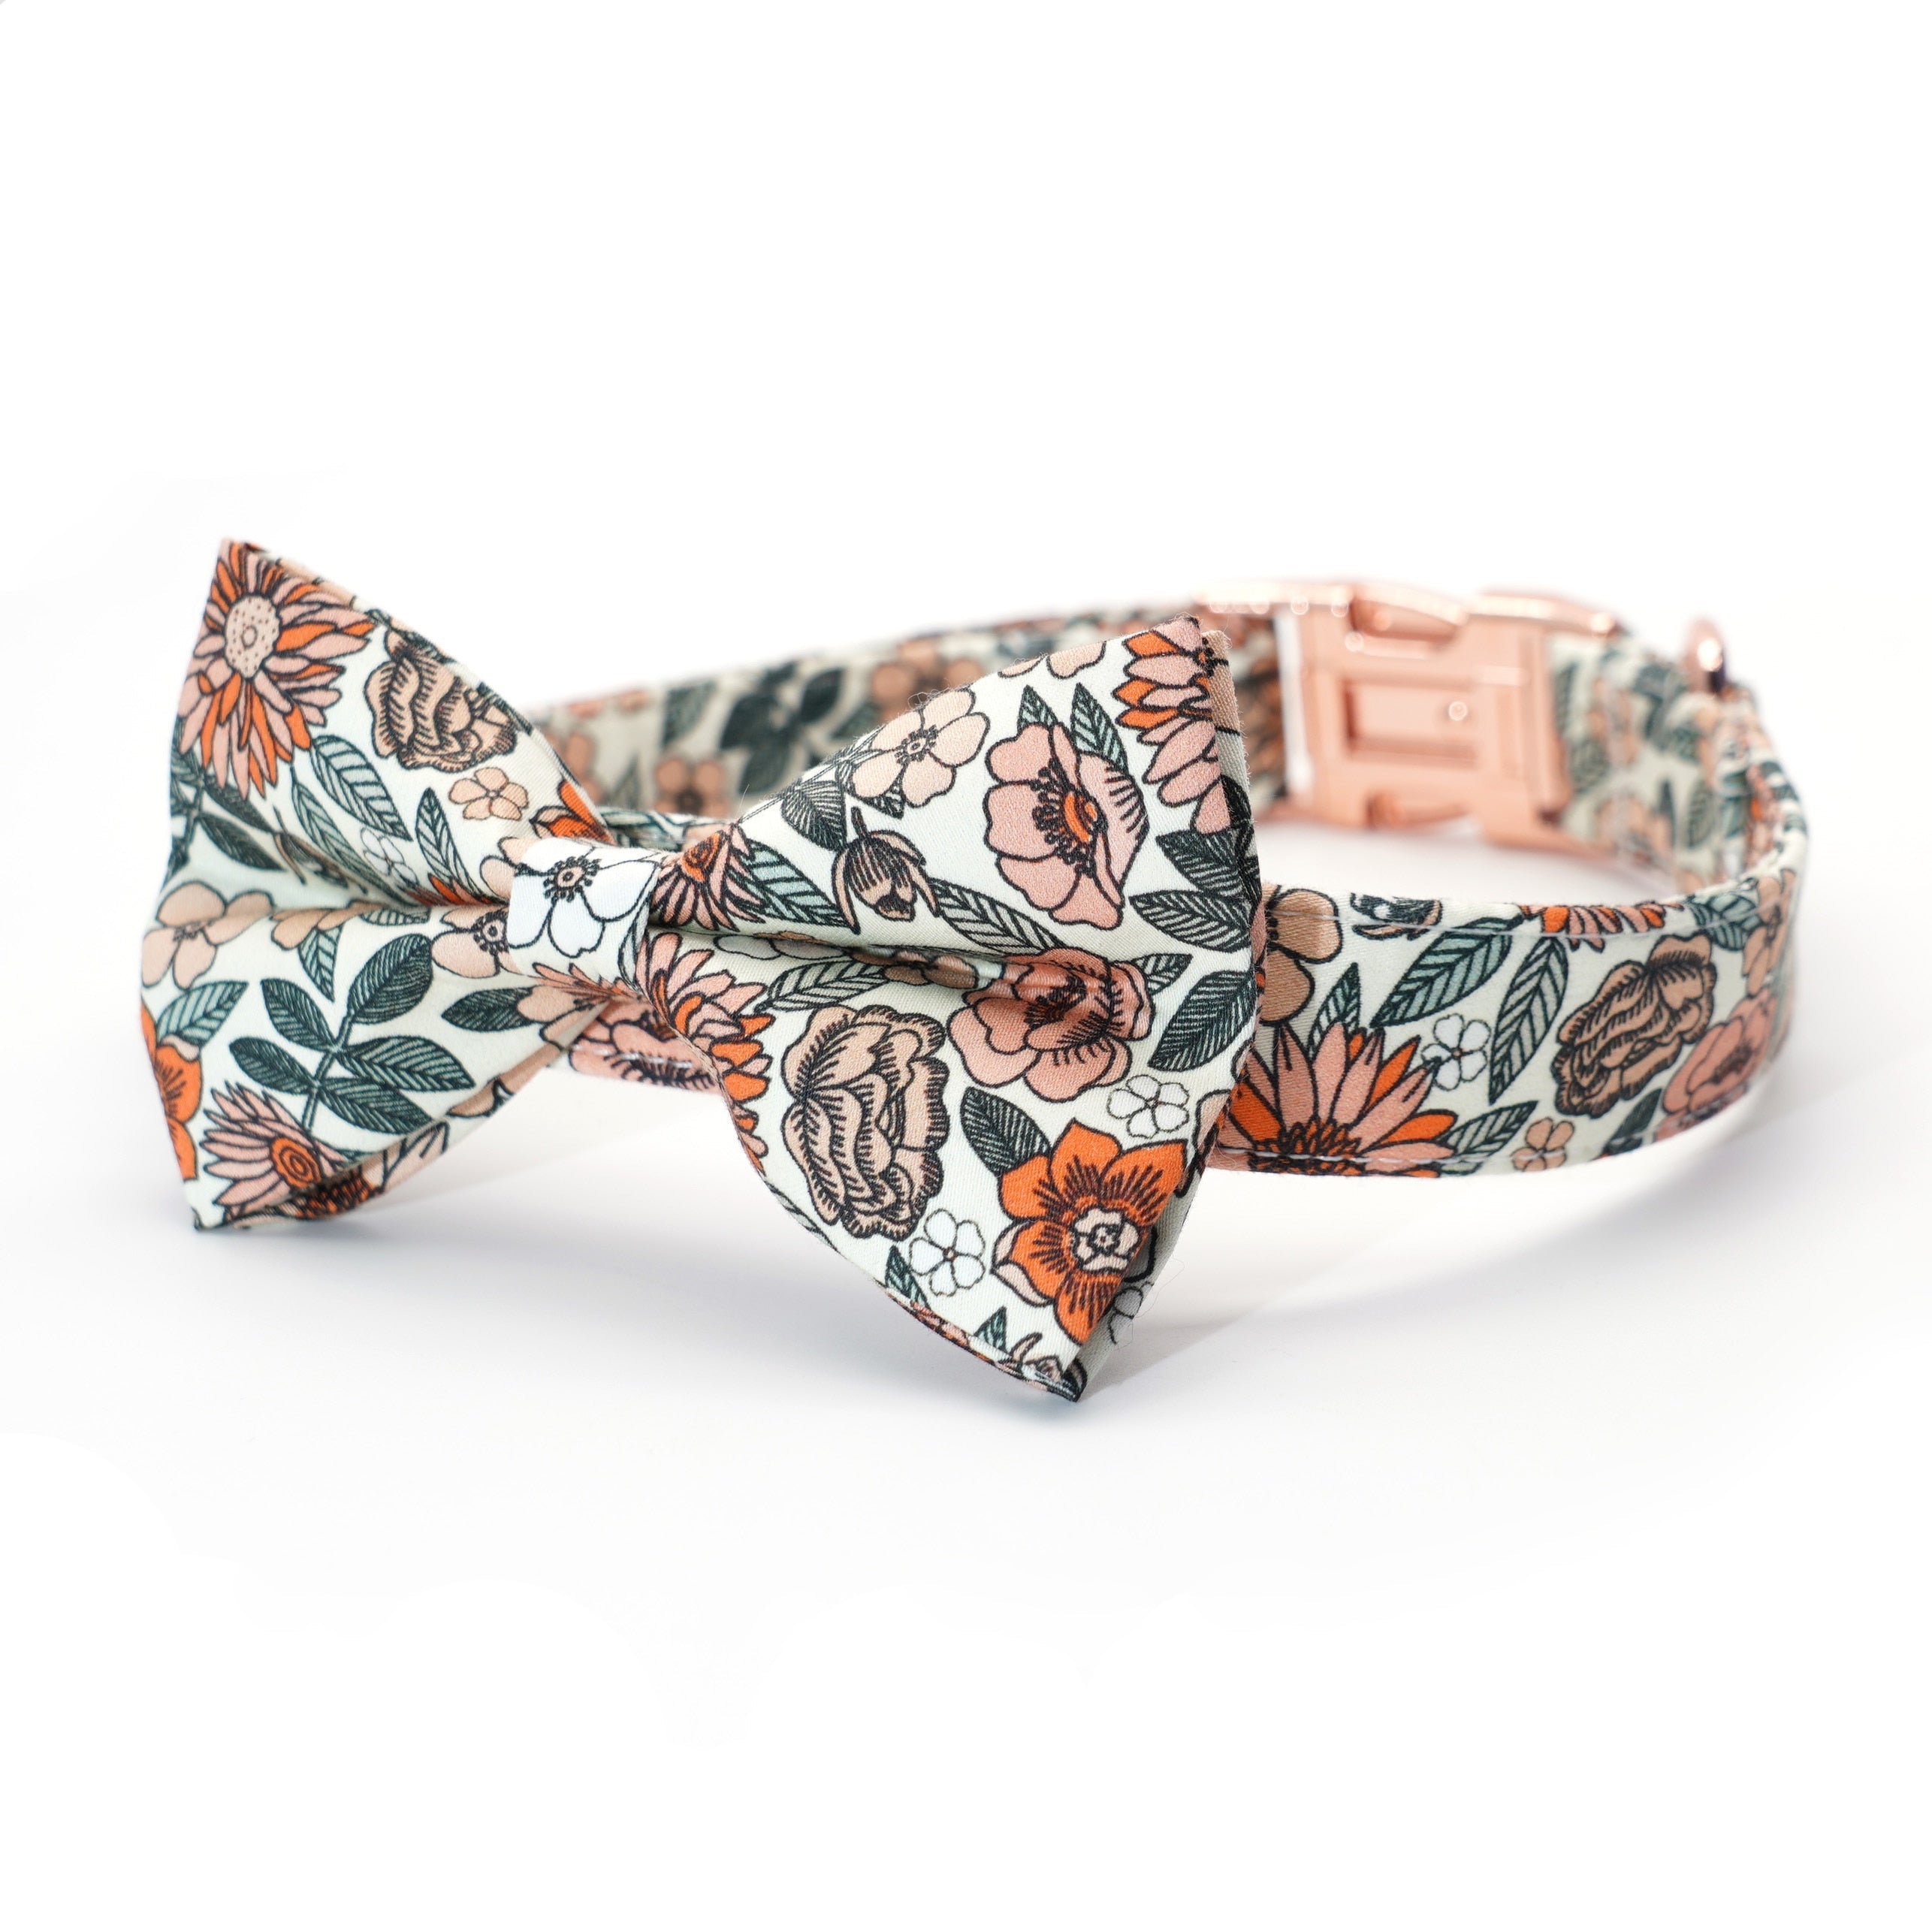 Boho Floral Bow Collar And Leash: Personalized Bow Collar And Leash Set